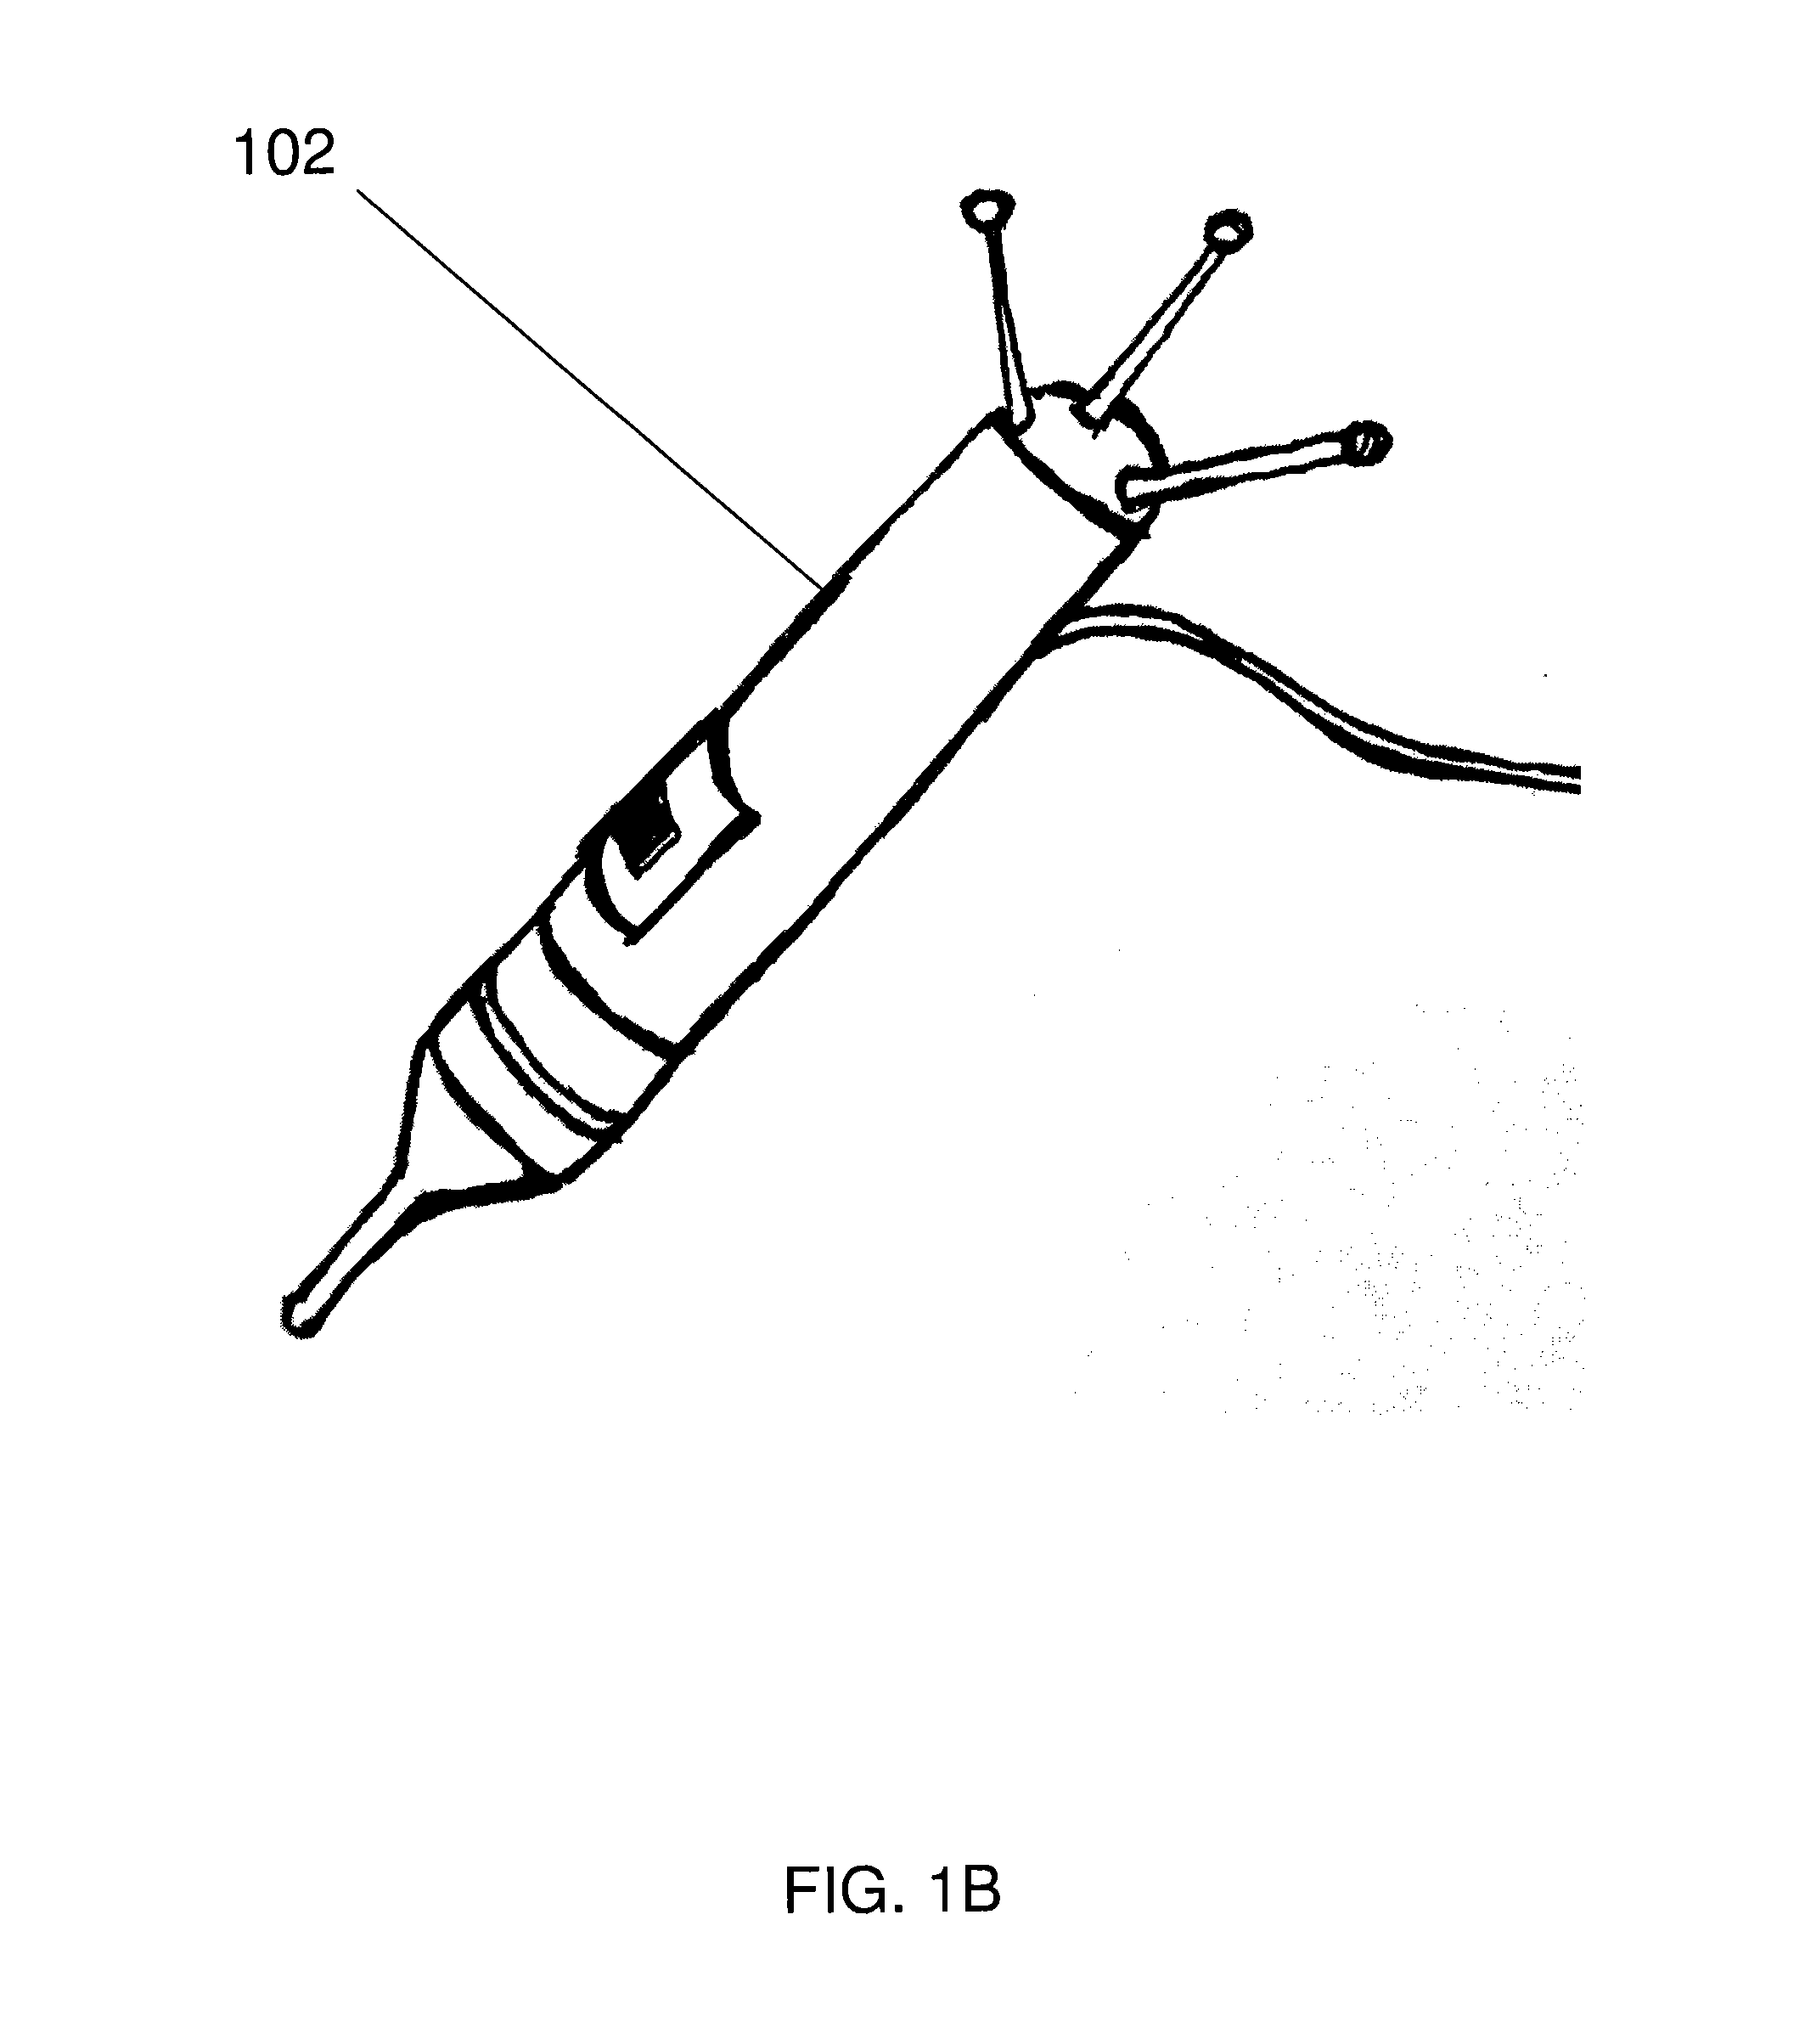 Systems and methods for capturing and recreating the feel of surfaces